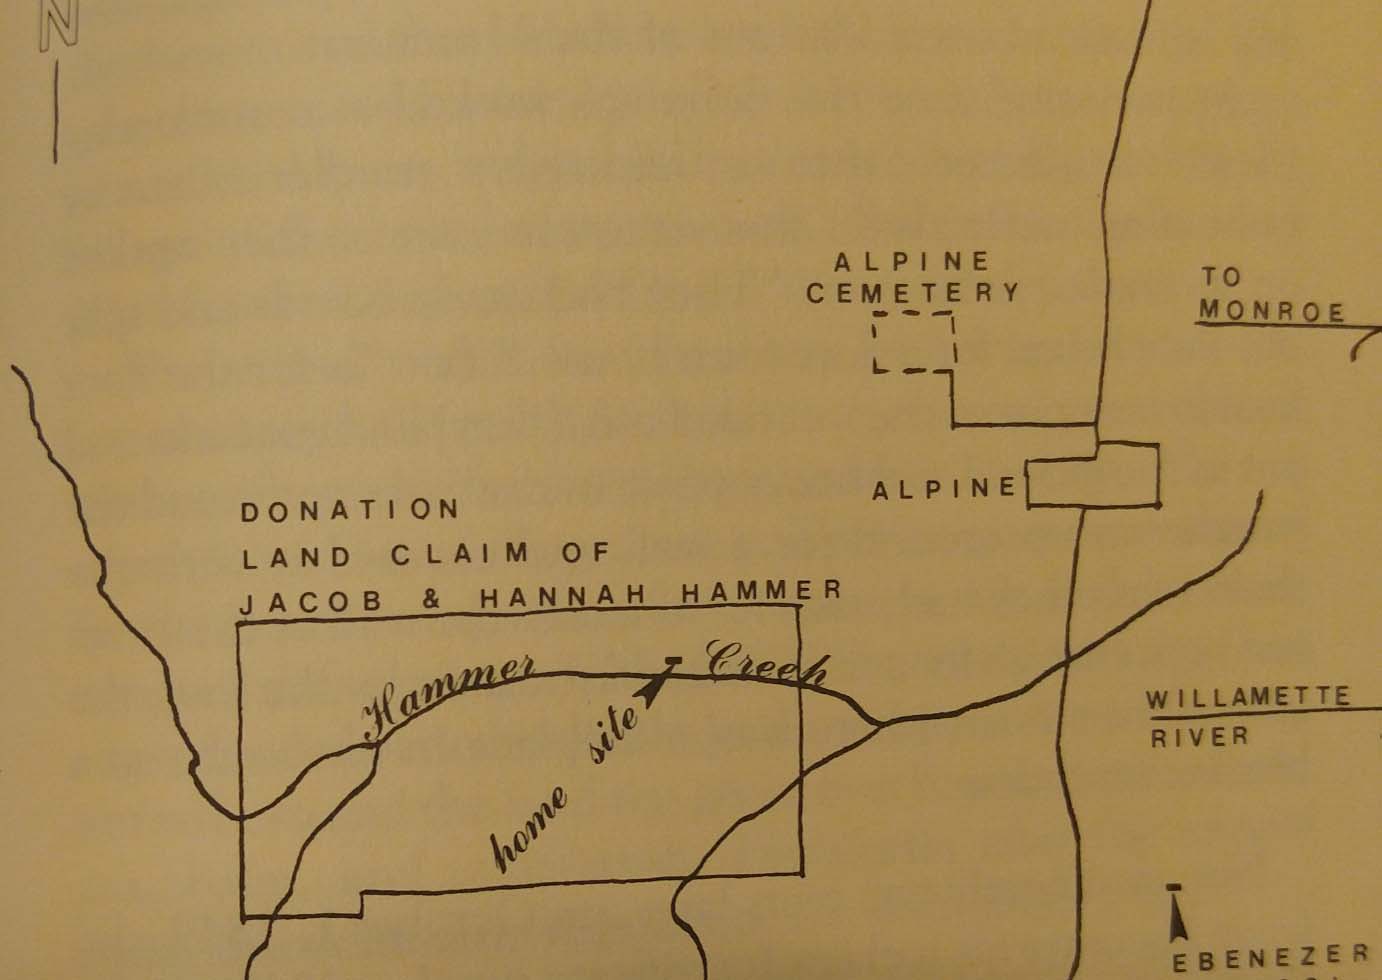 Hammer Allotment map from This Emigrating Company, The 1844 Oregon Trail Journal of Jacob Hammer, p 209. 